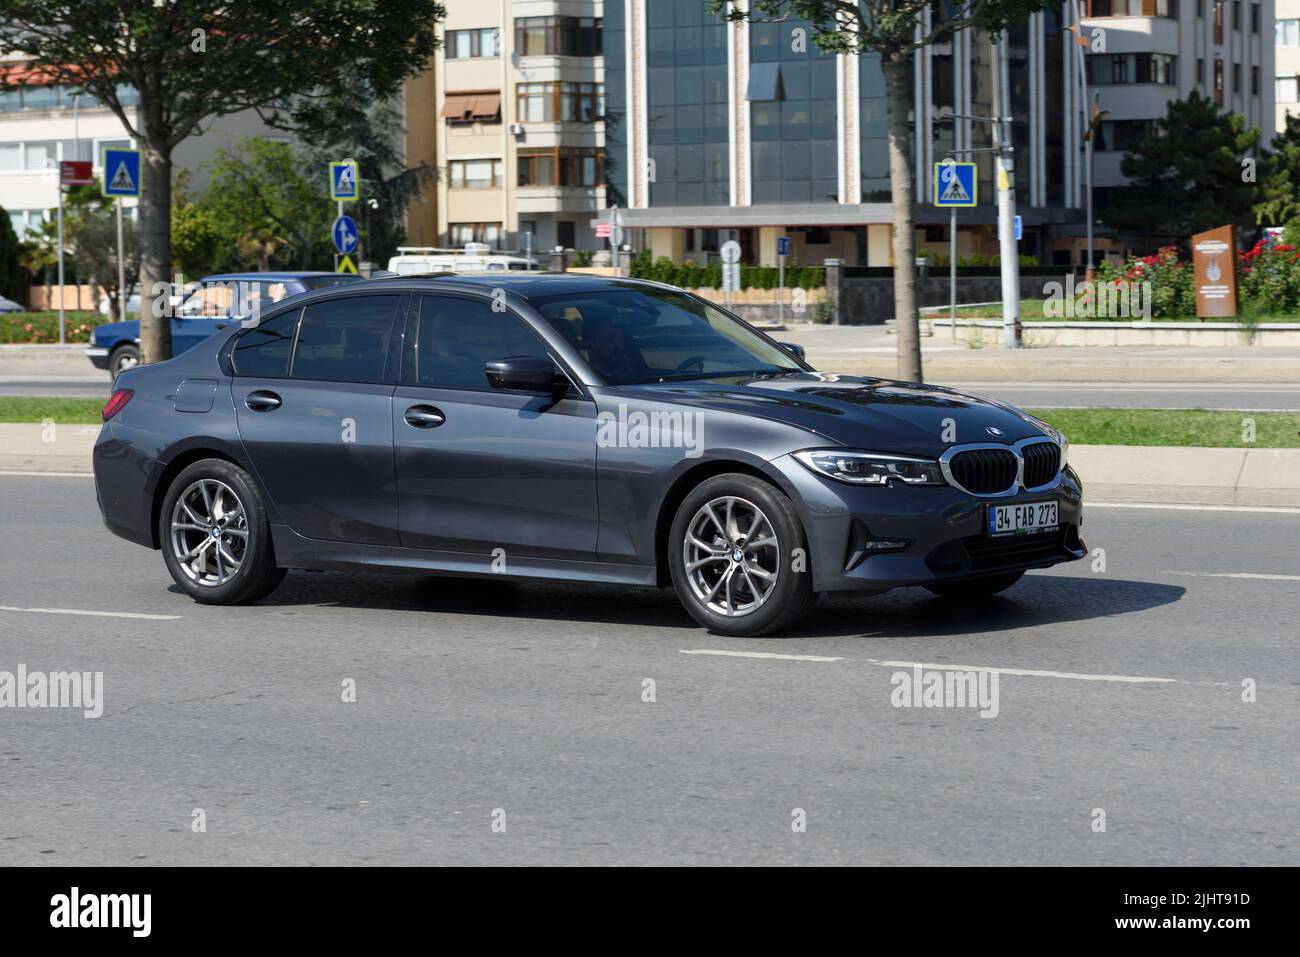 ISTANBUL, TURKEY - JULY 11, 2022: BMW 520 is a range of executive cars manufactured by German automaker BMW in various engine and body configurations. Stock Photo